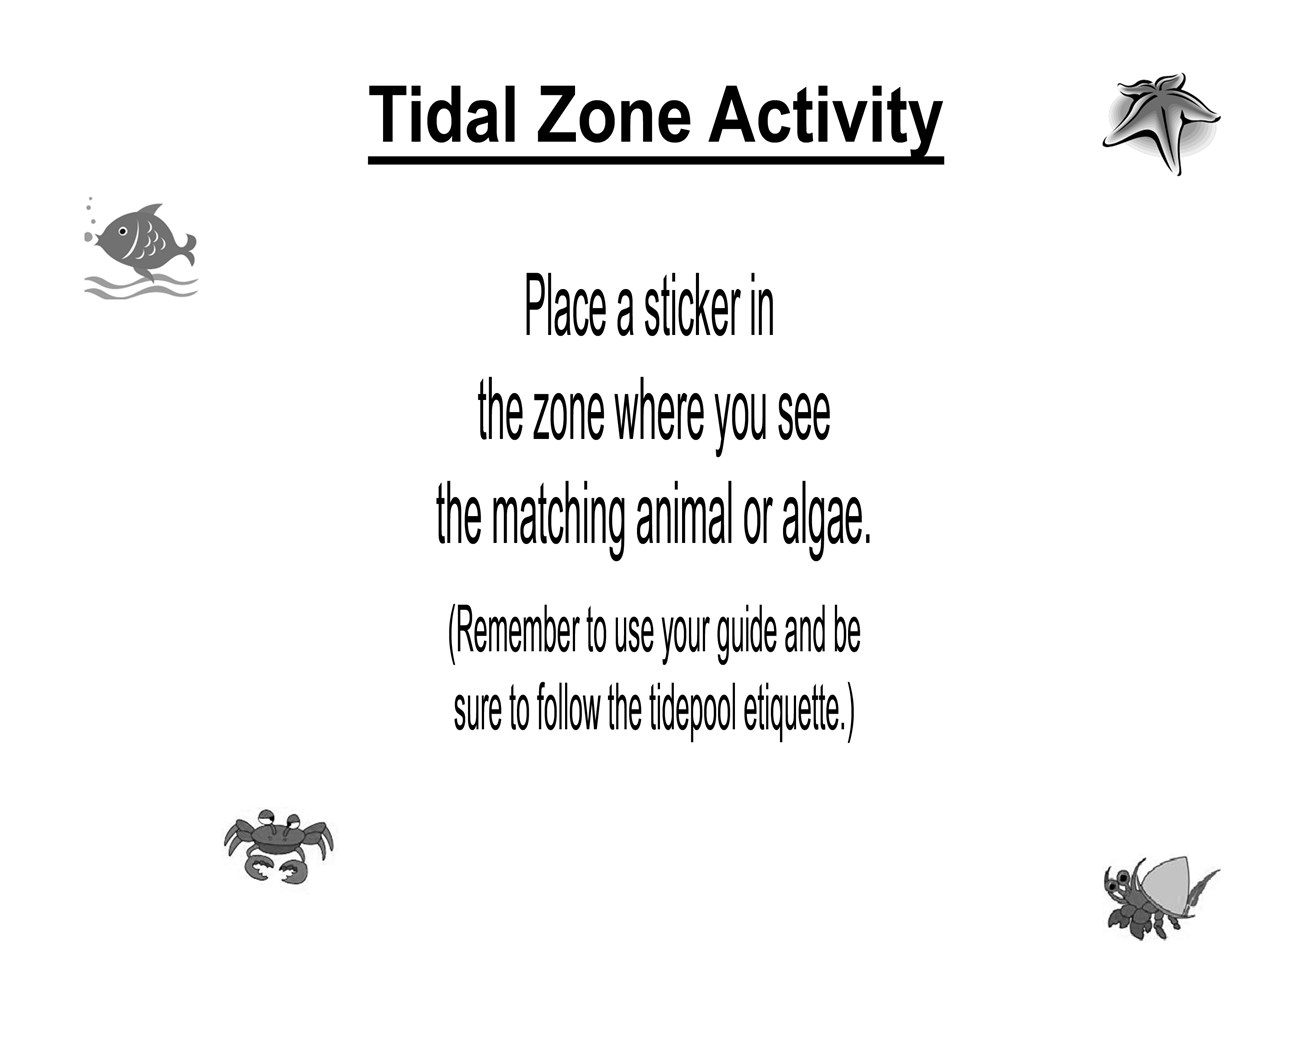 Description of how to use the Tidal Zone Activity